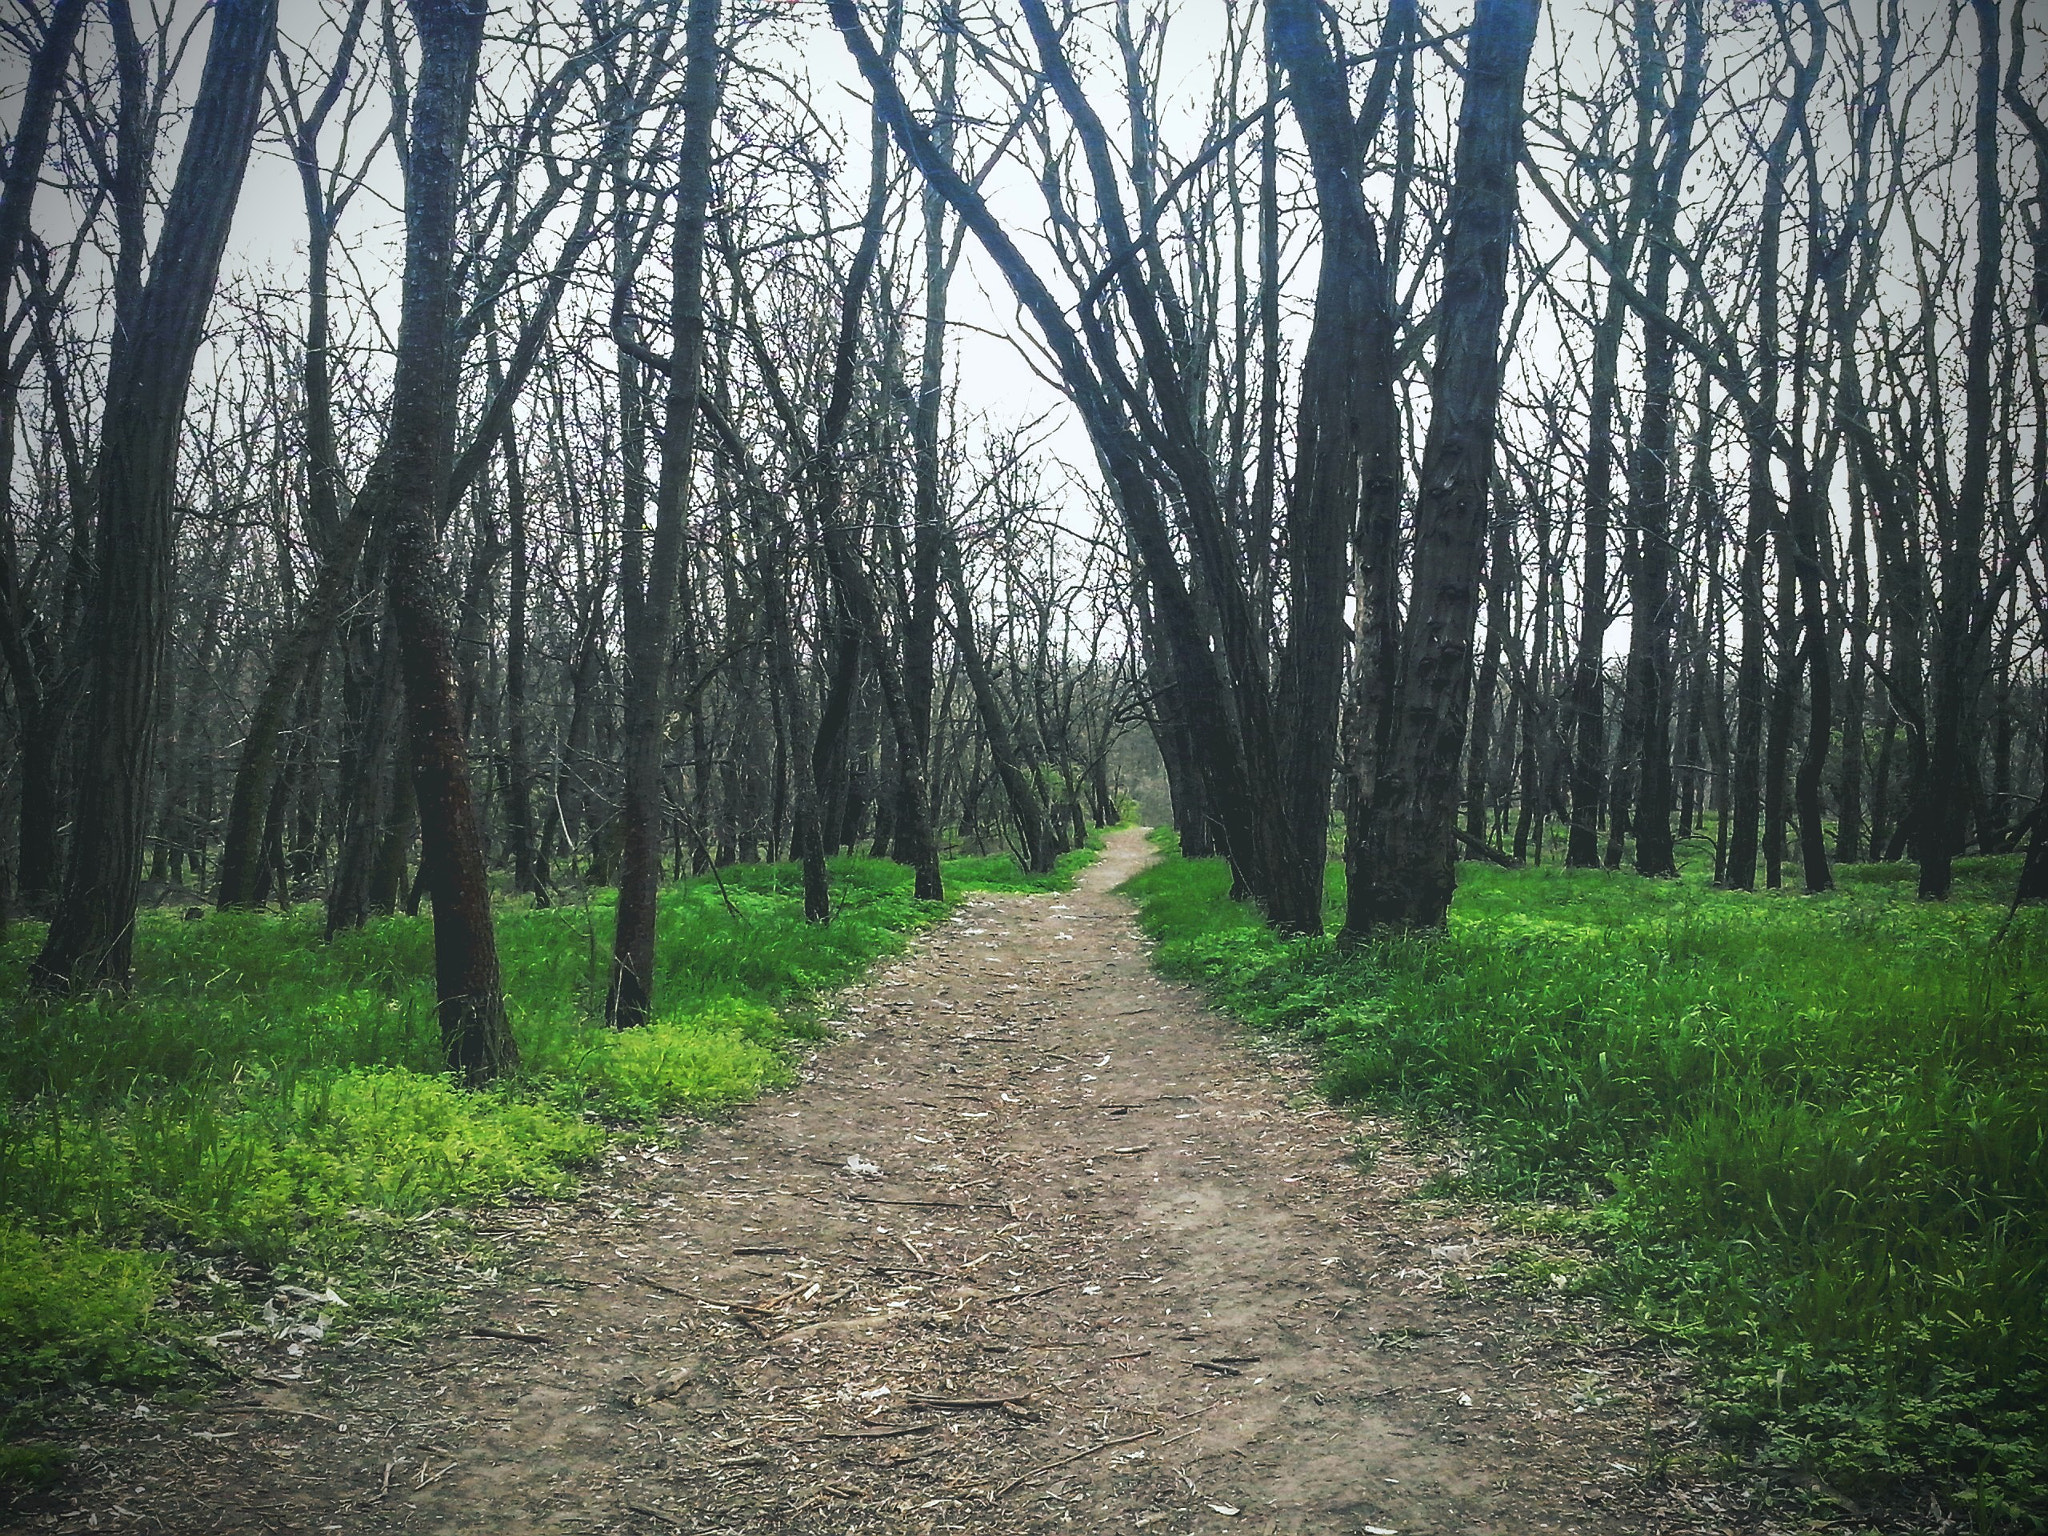 LG OPTIMUS L5 II sample photo. Forest photography